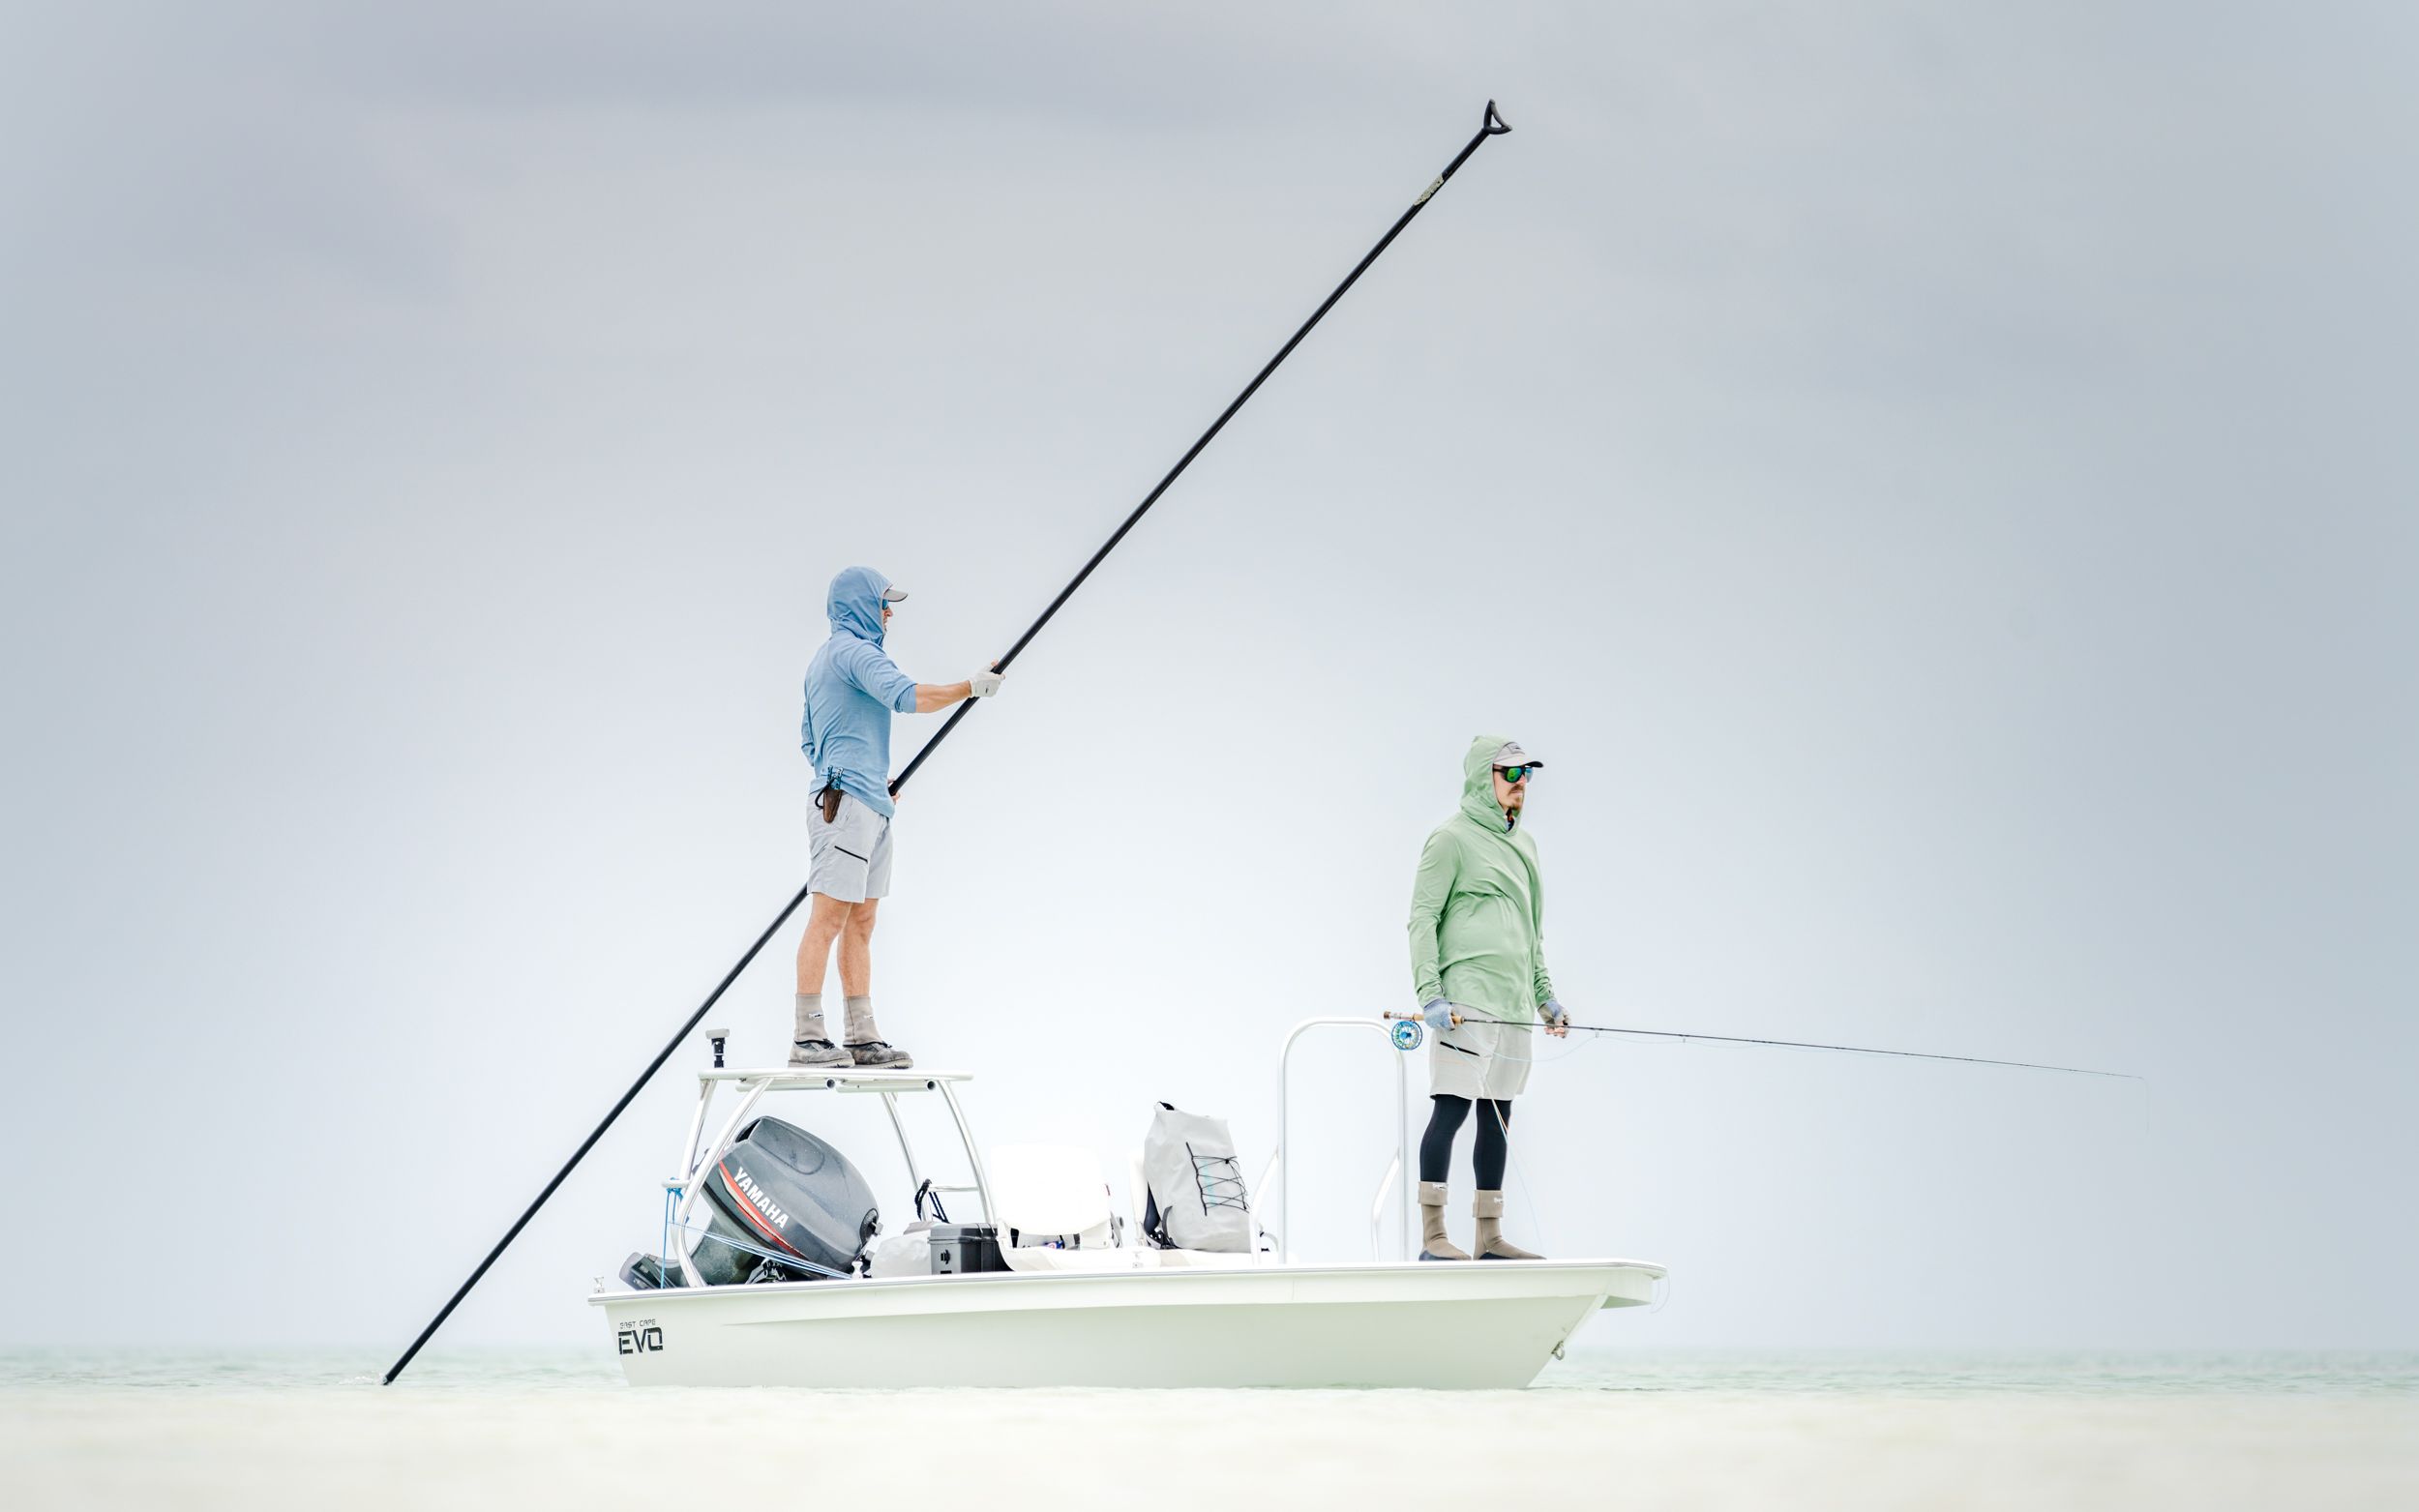 Poling the flats saltwater fly fishing skiff